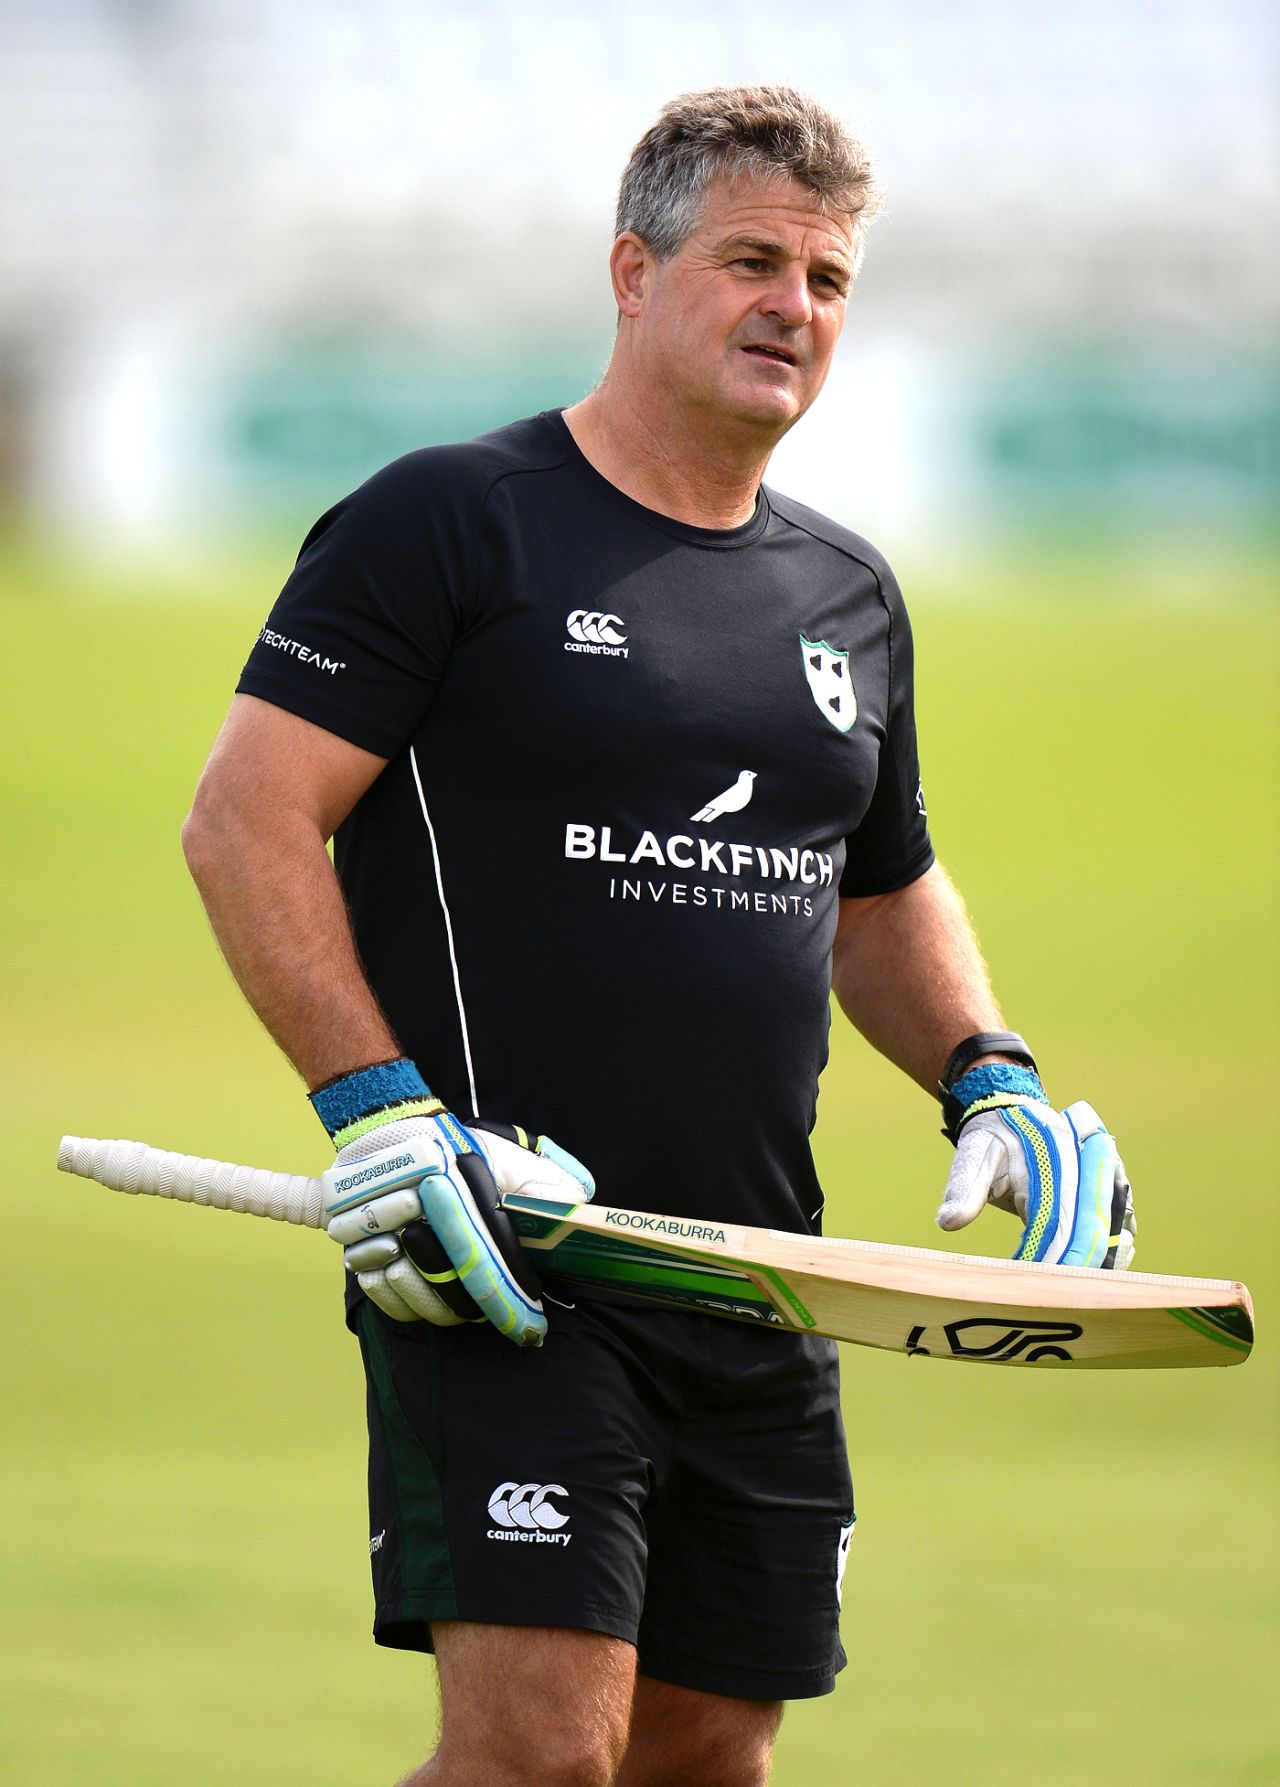 Steve Rhodes engages the players in a fielding session, Nottinghamshire v Worcestershire, Nottingham, September 7, 2017